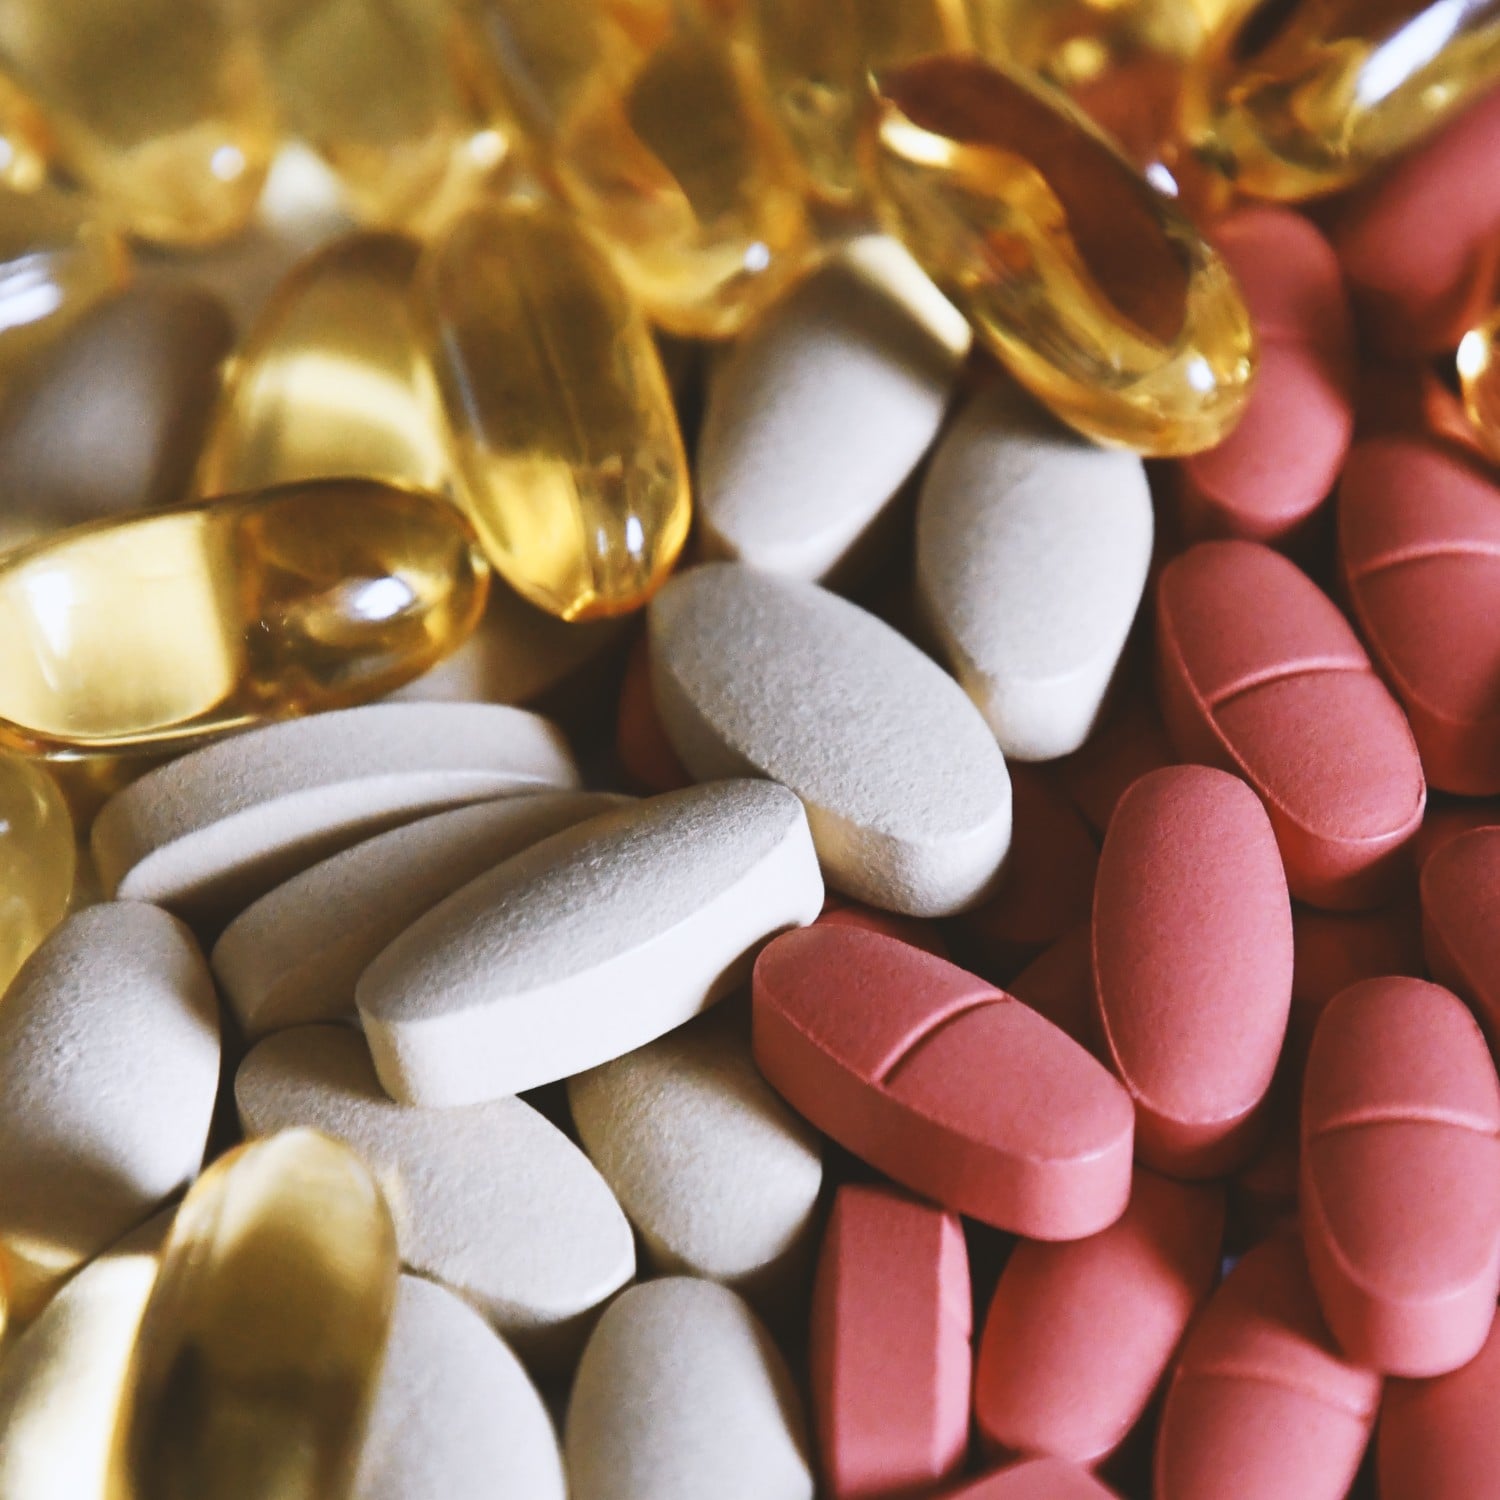 supplements can interact with prescription medication